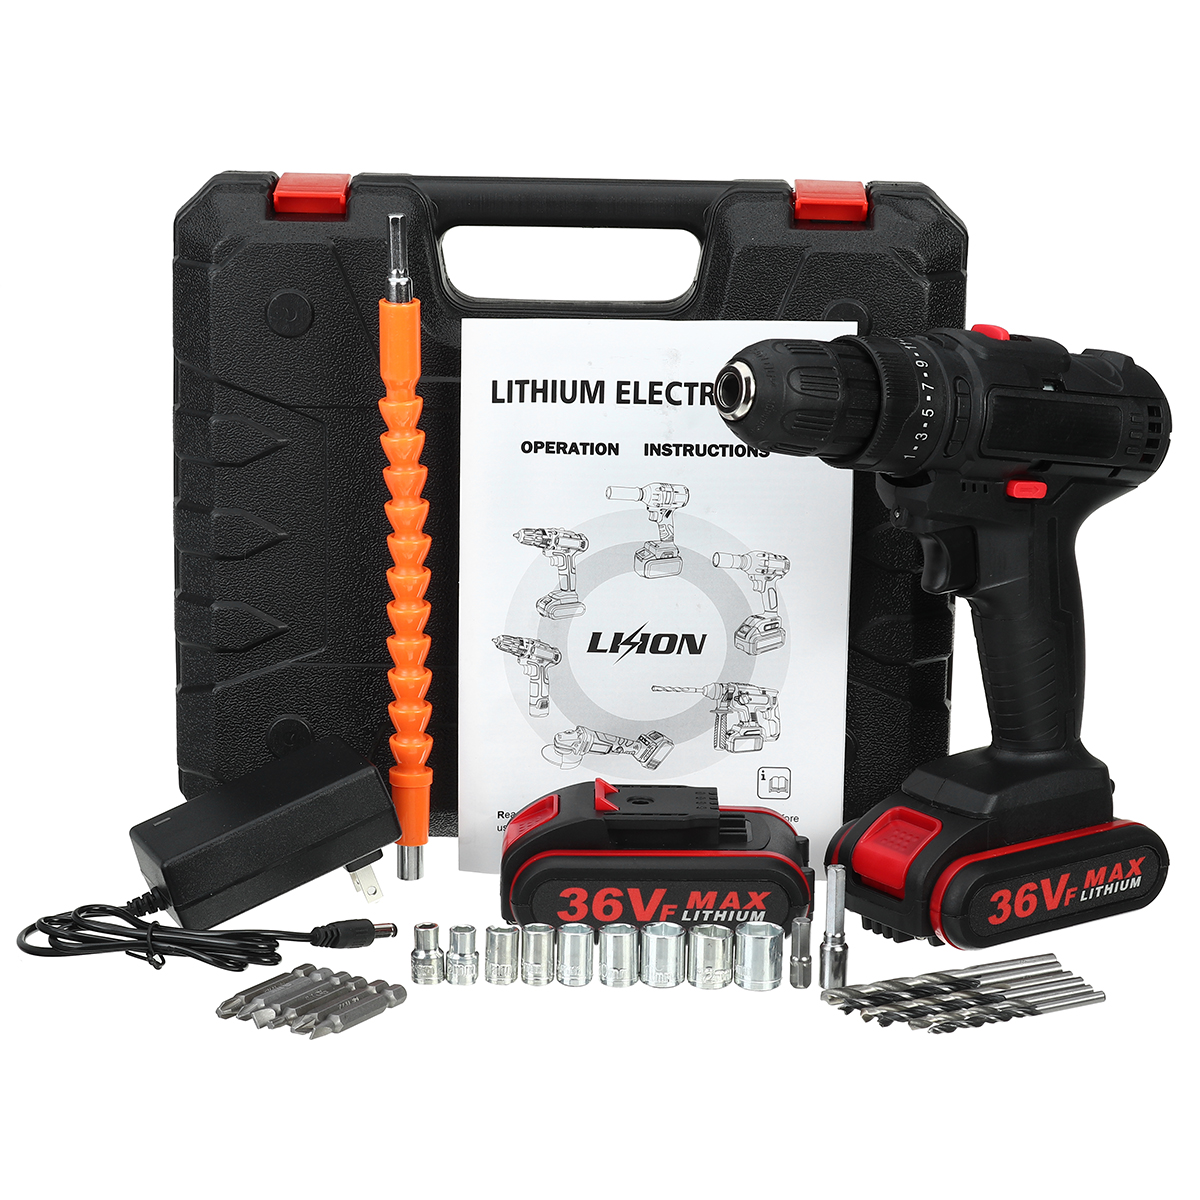 36V-Cordless-Electric-Impact-Hammer-LED-Light-Drill-Screwdriver-With-2-Battery-Household-Power-Tools-1779033-8